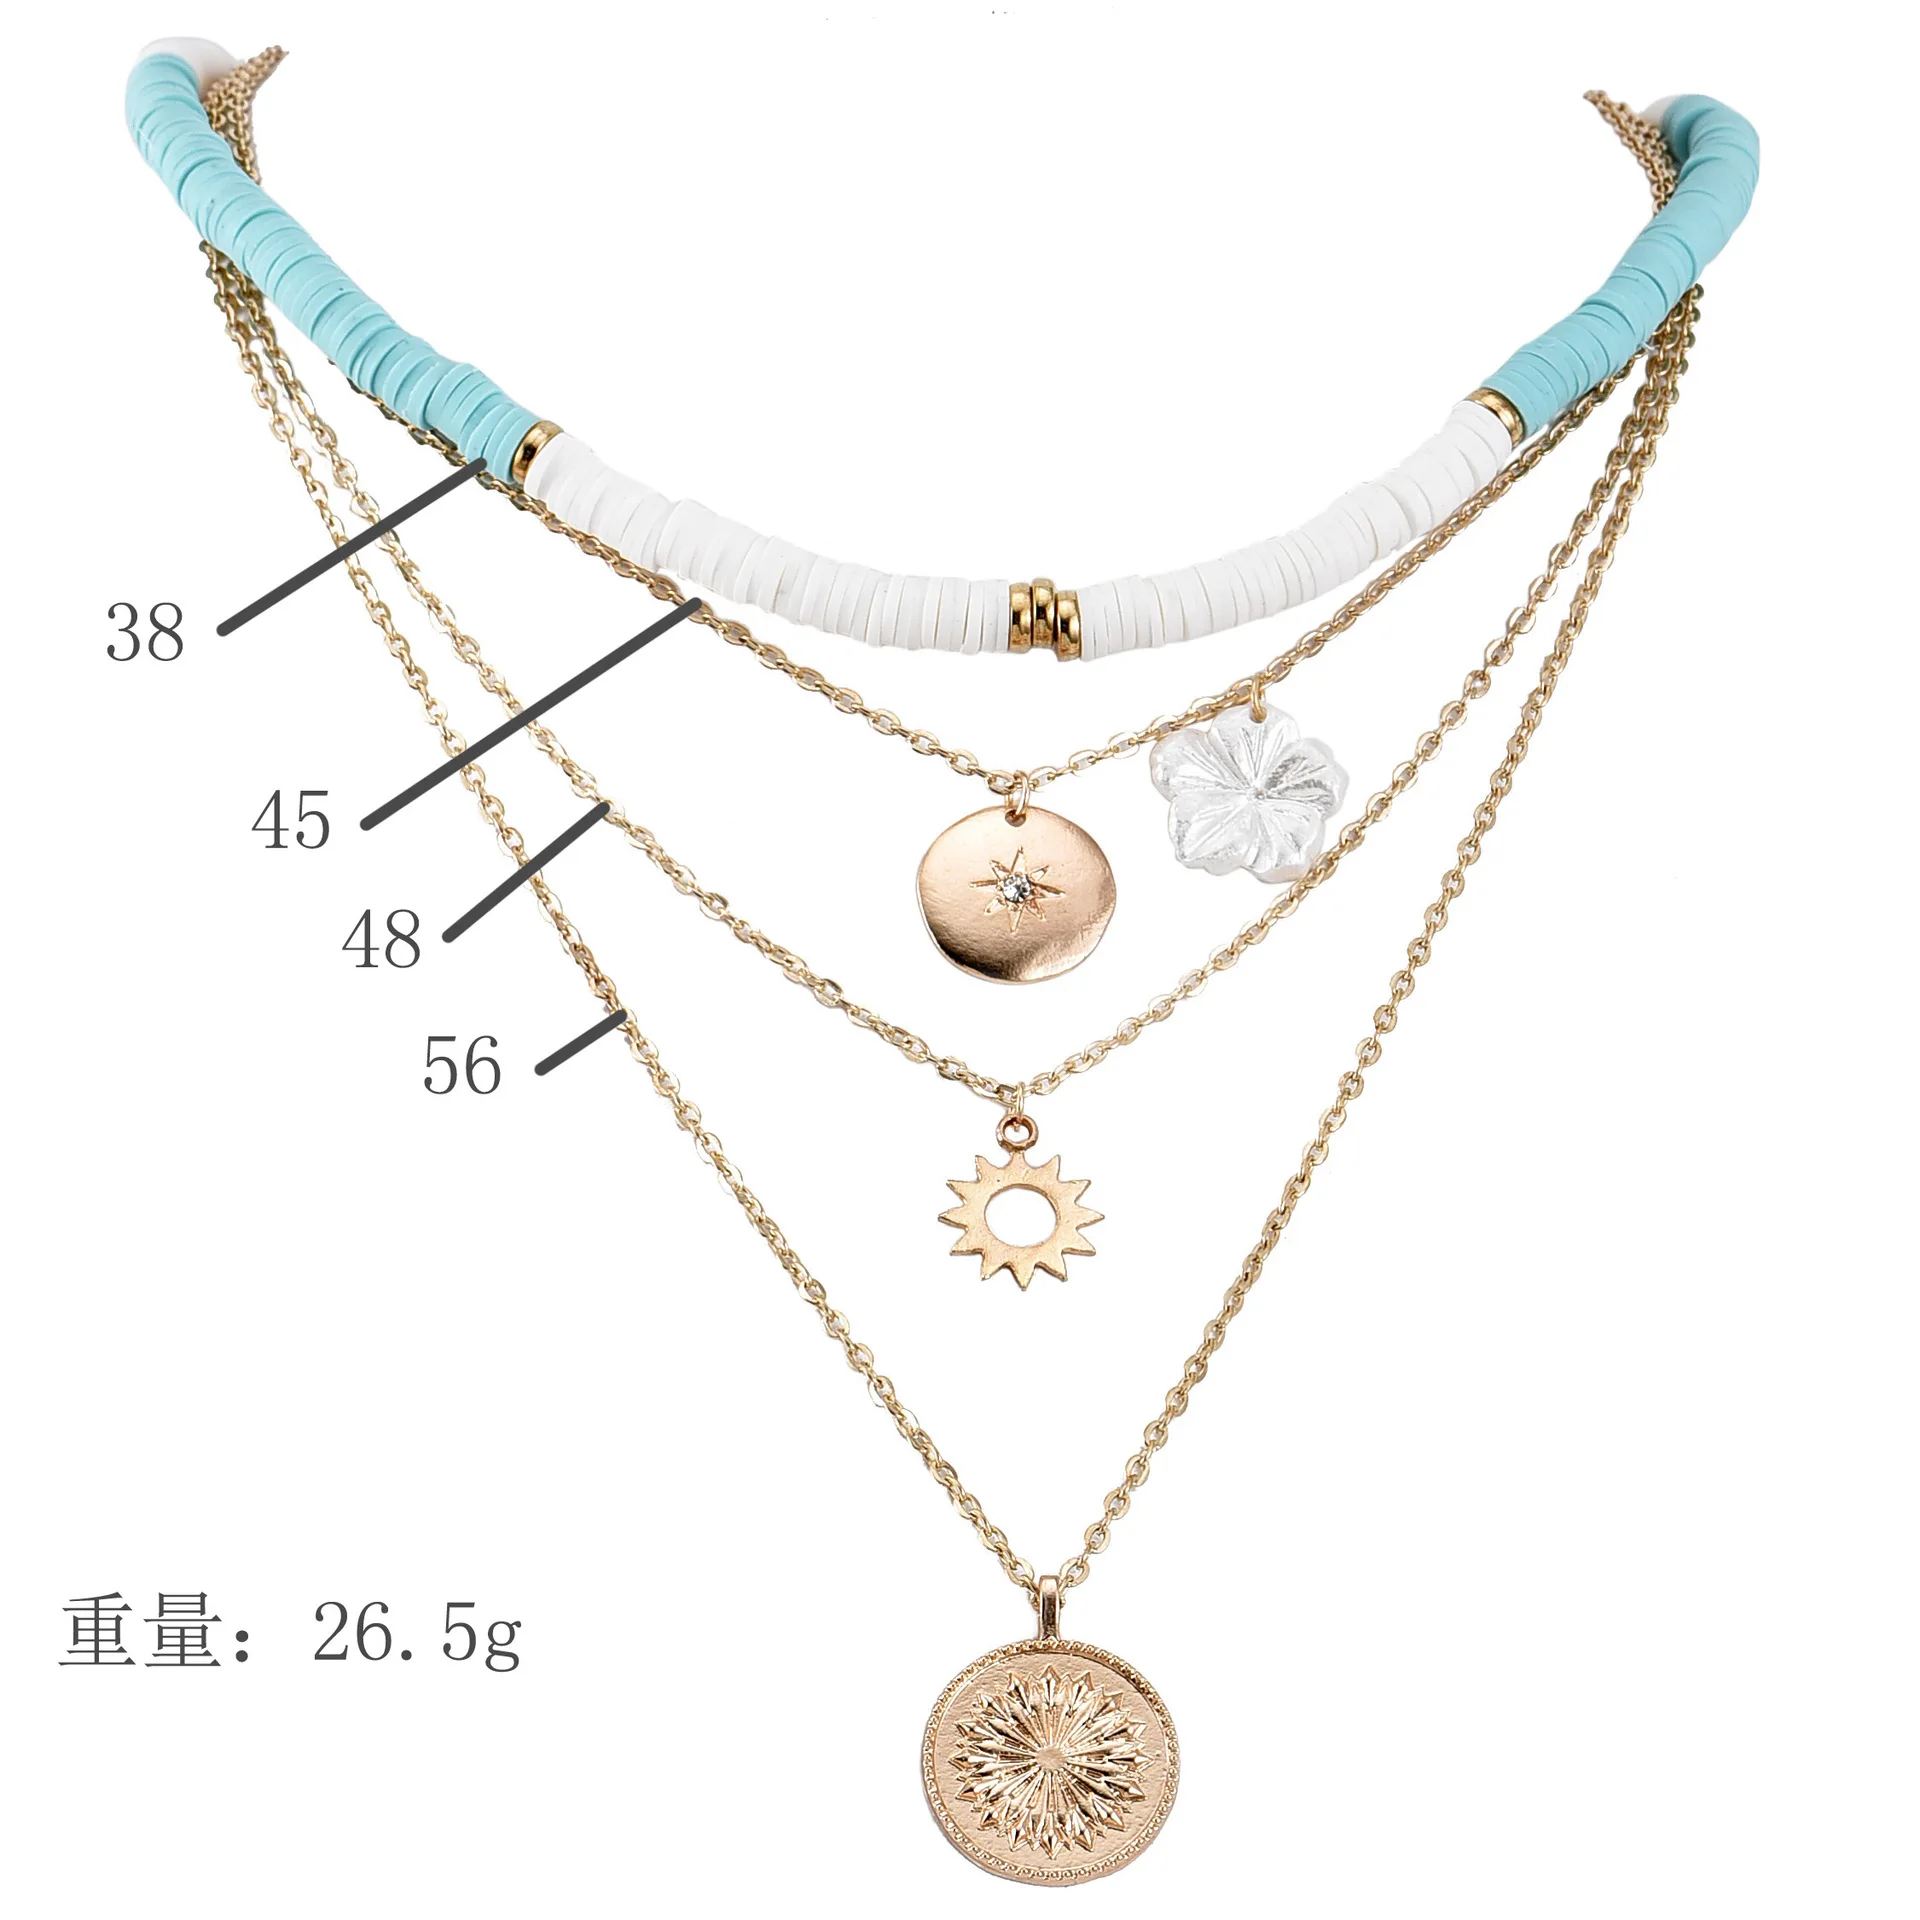 

Multi layerd Bohemian ethnic style with global fashion pendants necklace set 5pcs coin blossom icons blue and white accent